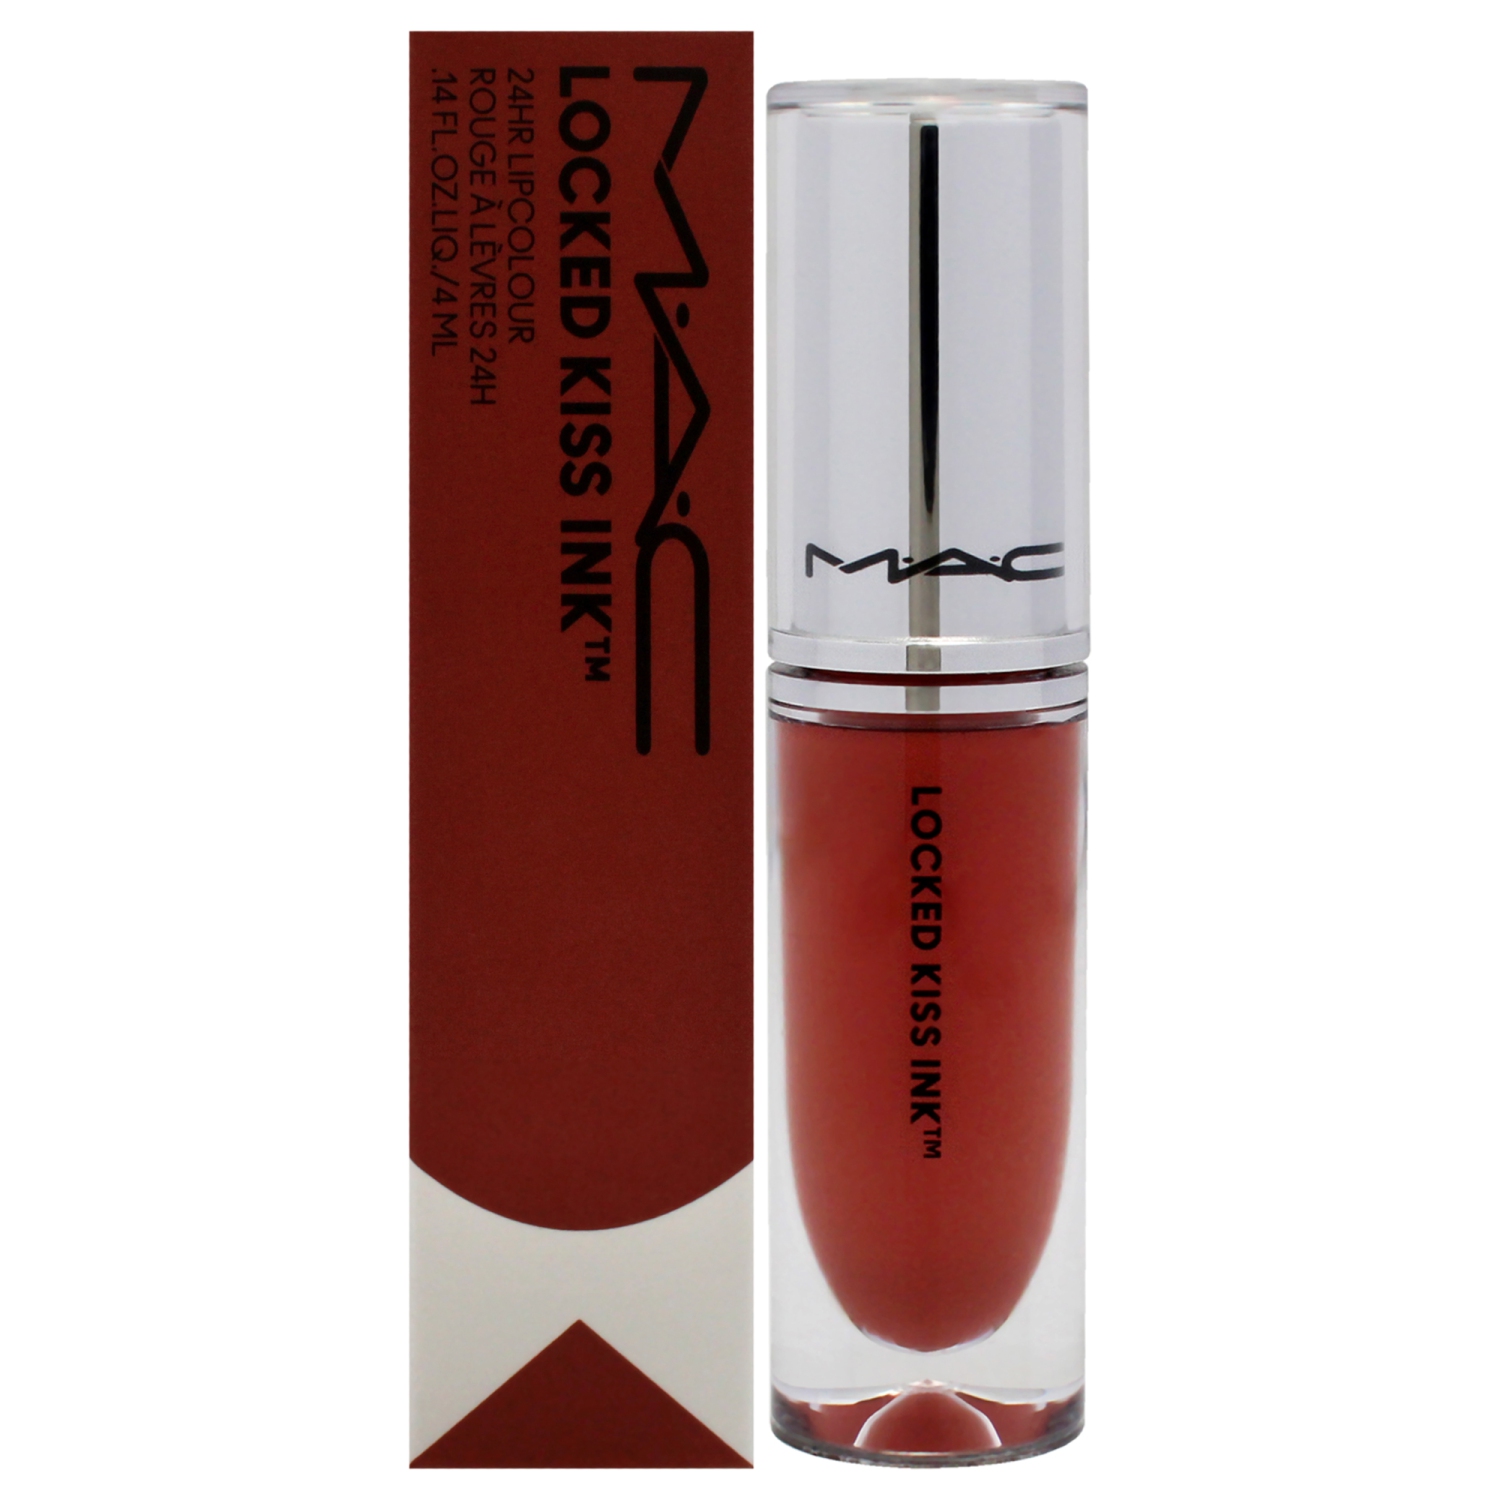 Locked Kiss Ink Lipcolor - 60 Mull it Over and Over by MAC for Women - 0.14 oz Lipstick